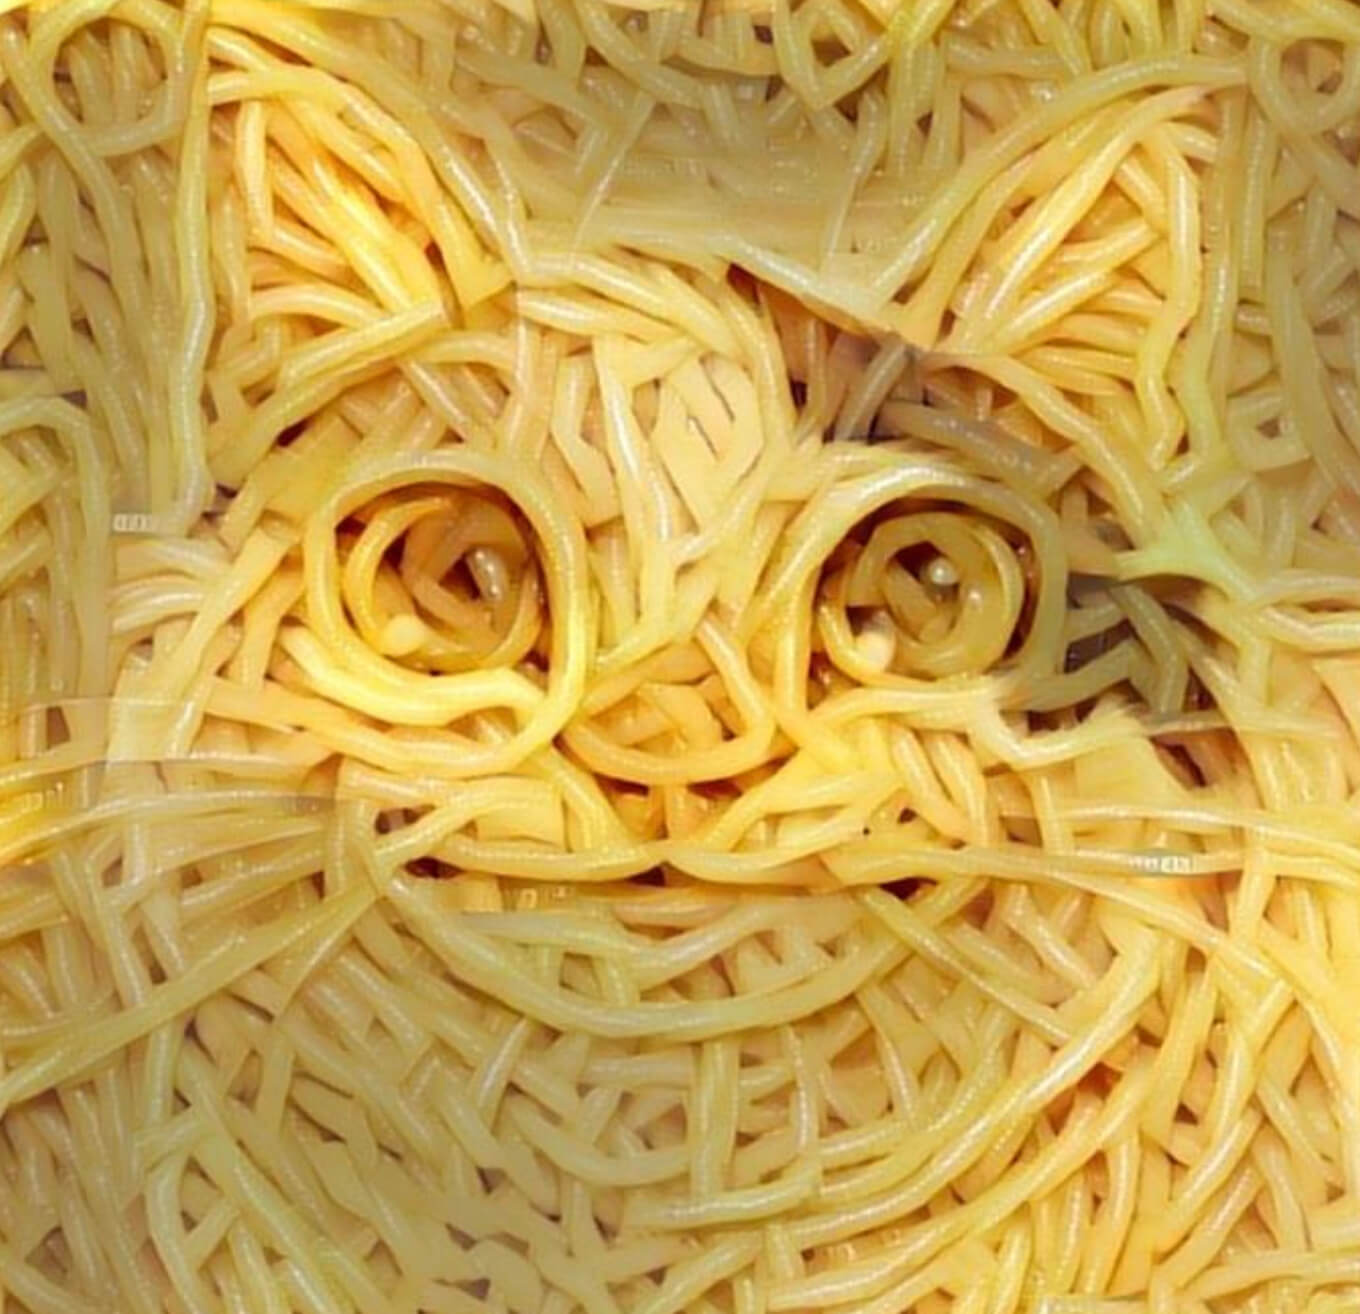 cat's face made of spaghetti